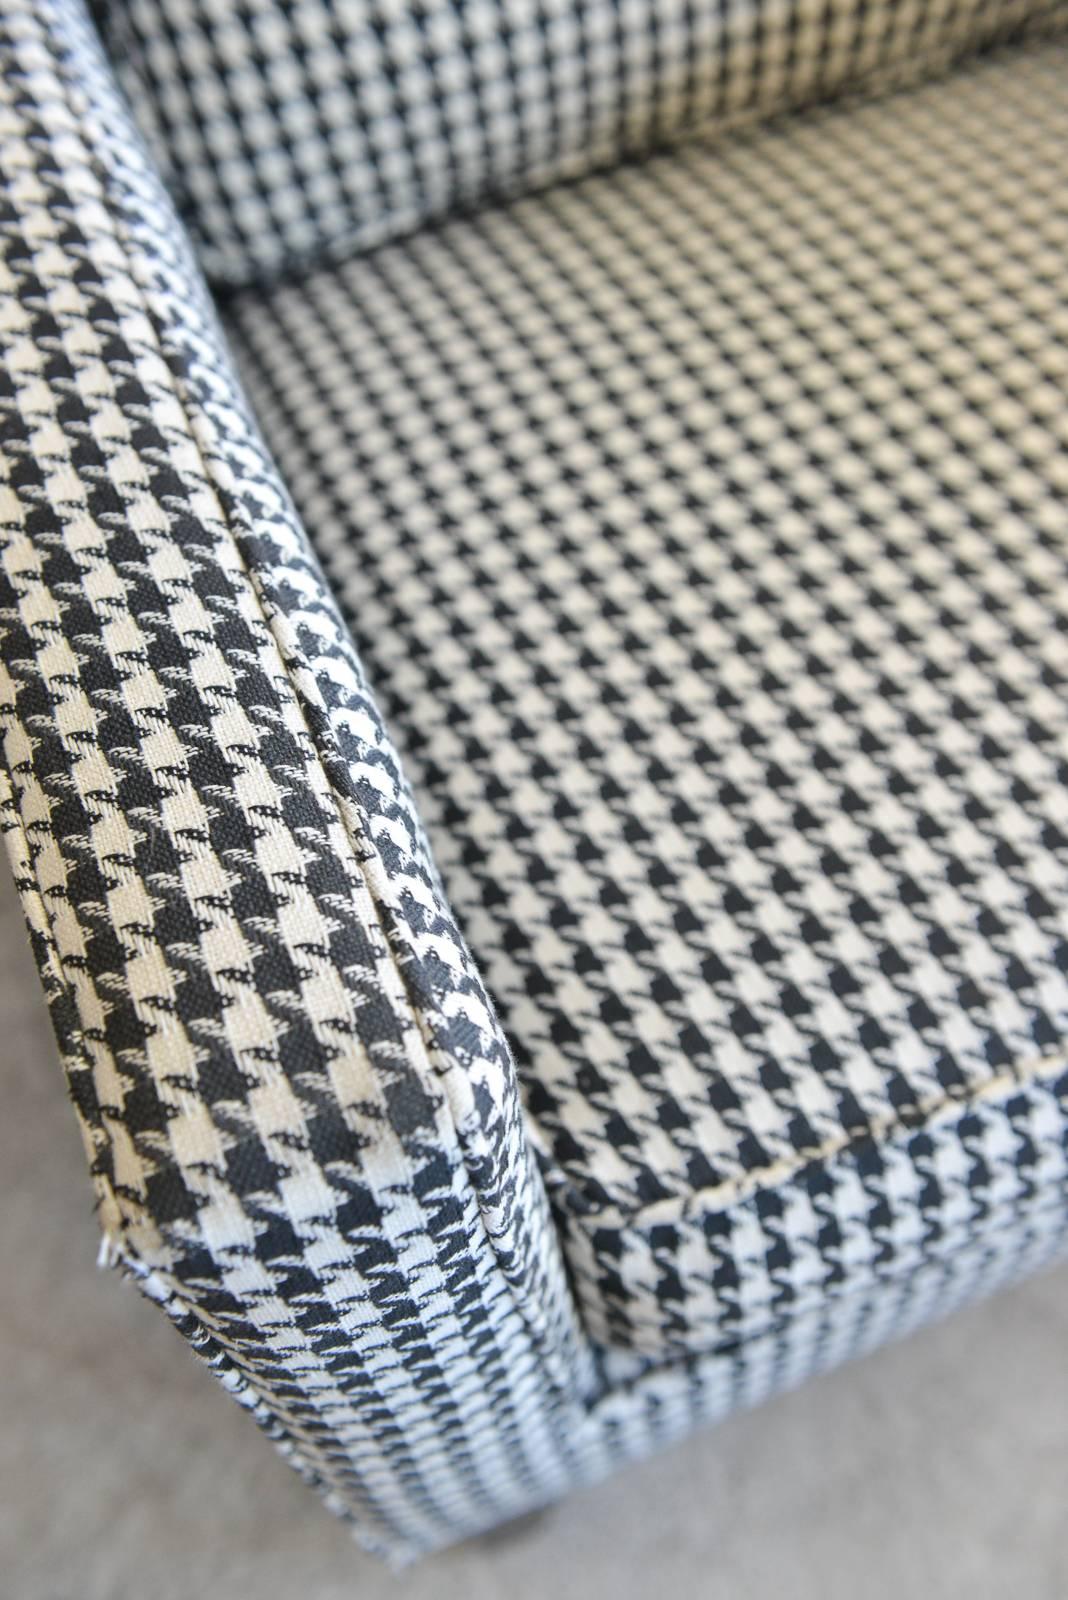 Late 20th Century Houndstooth Lounge Chair by Edward Wormley for Dunbar, circa 1970